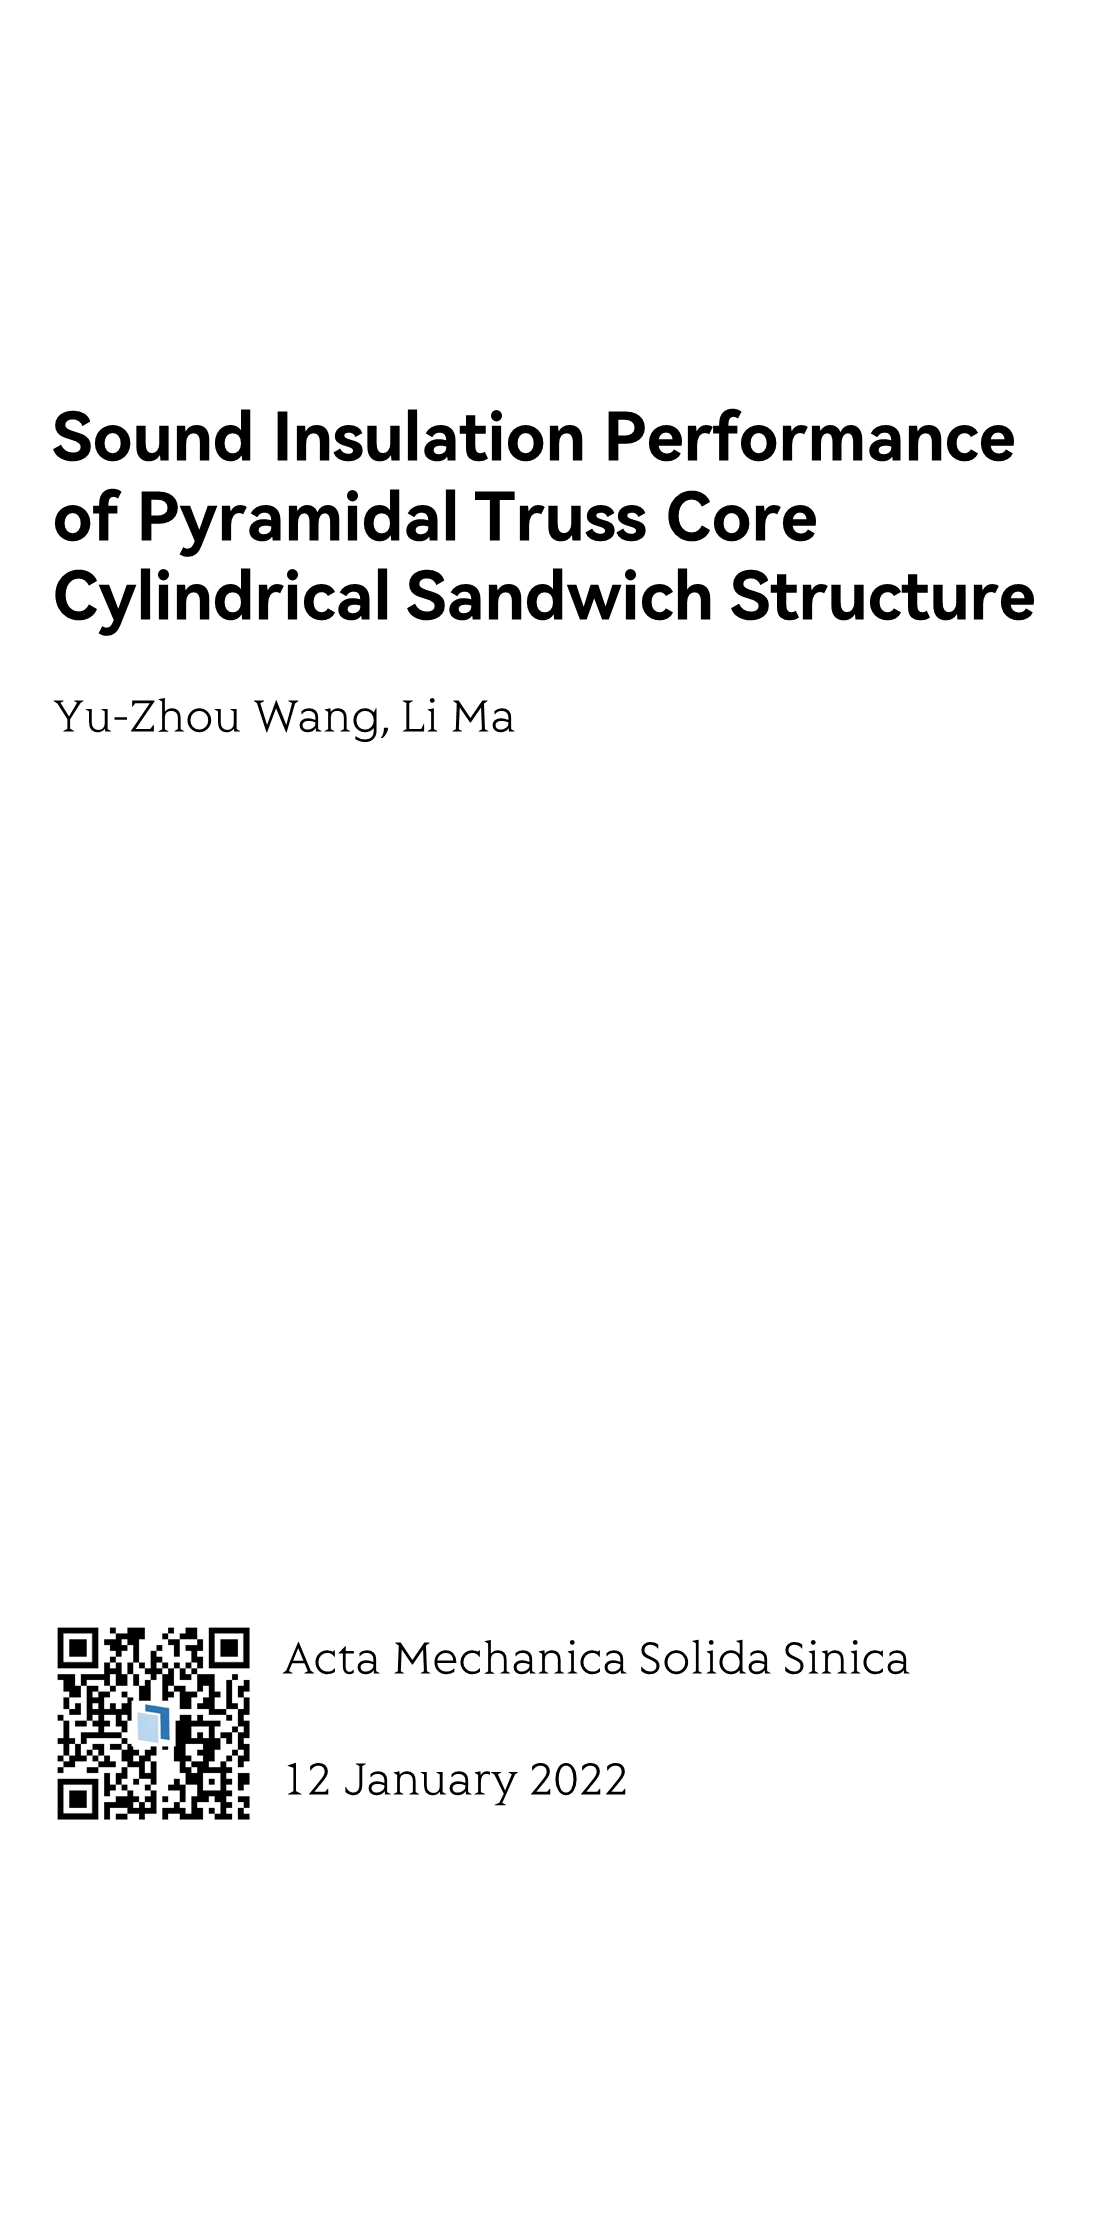 Sound Insulation Performance of Pyramidal Truss Core Cylindrical Sandwich Structure_1